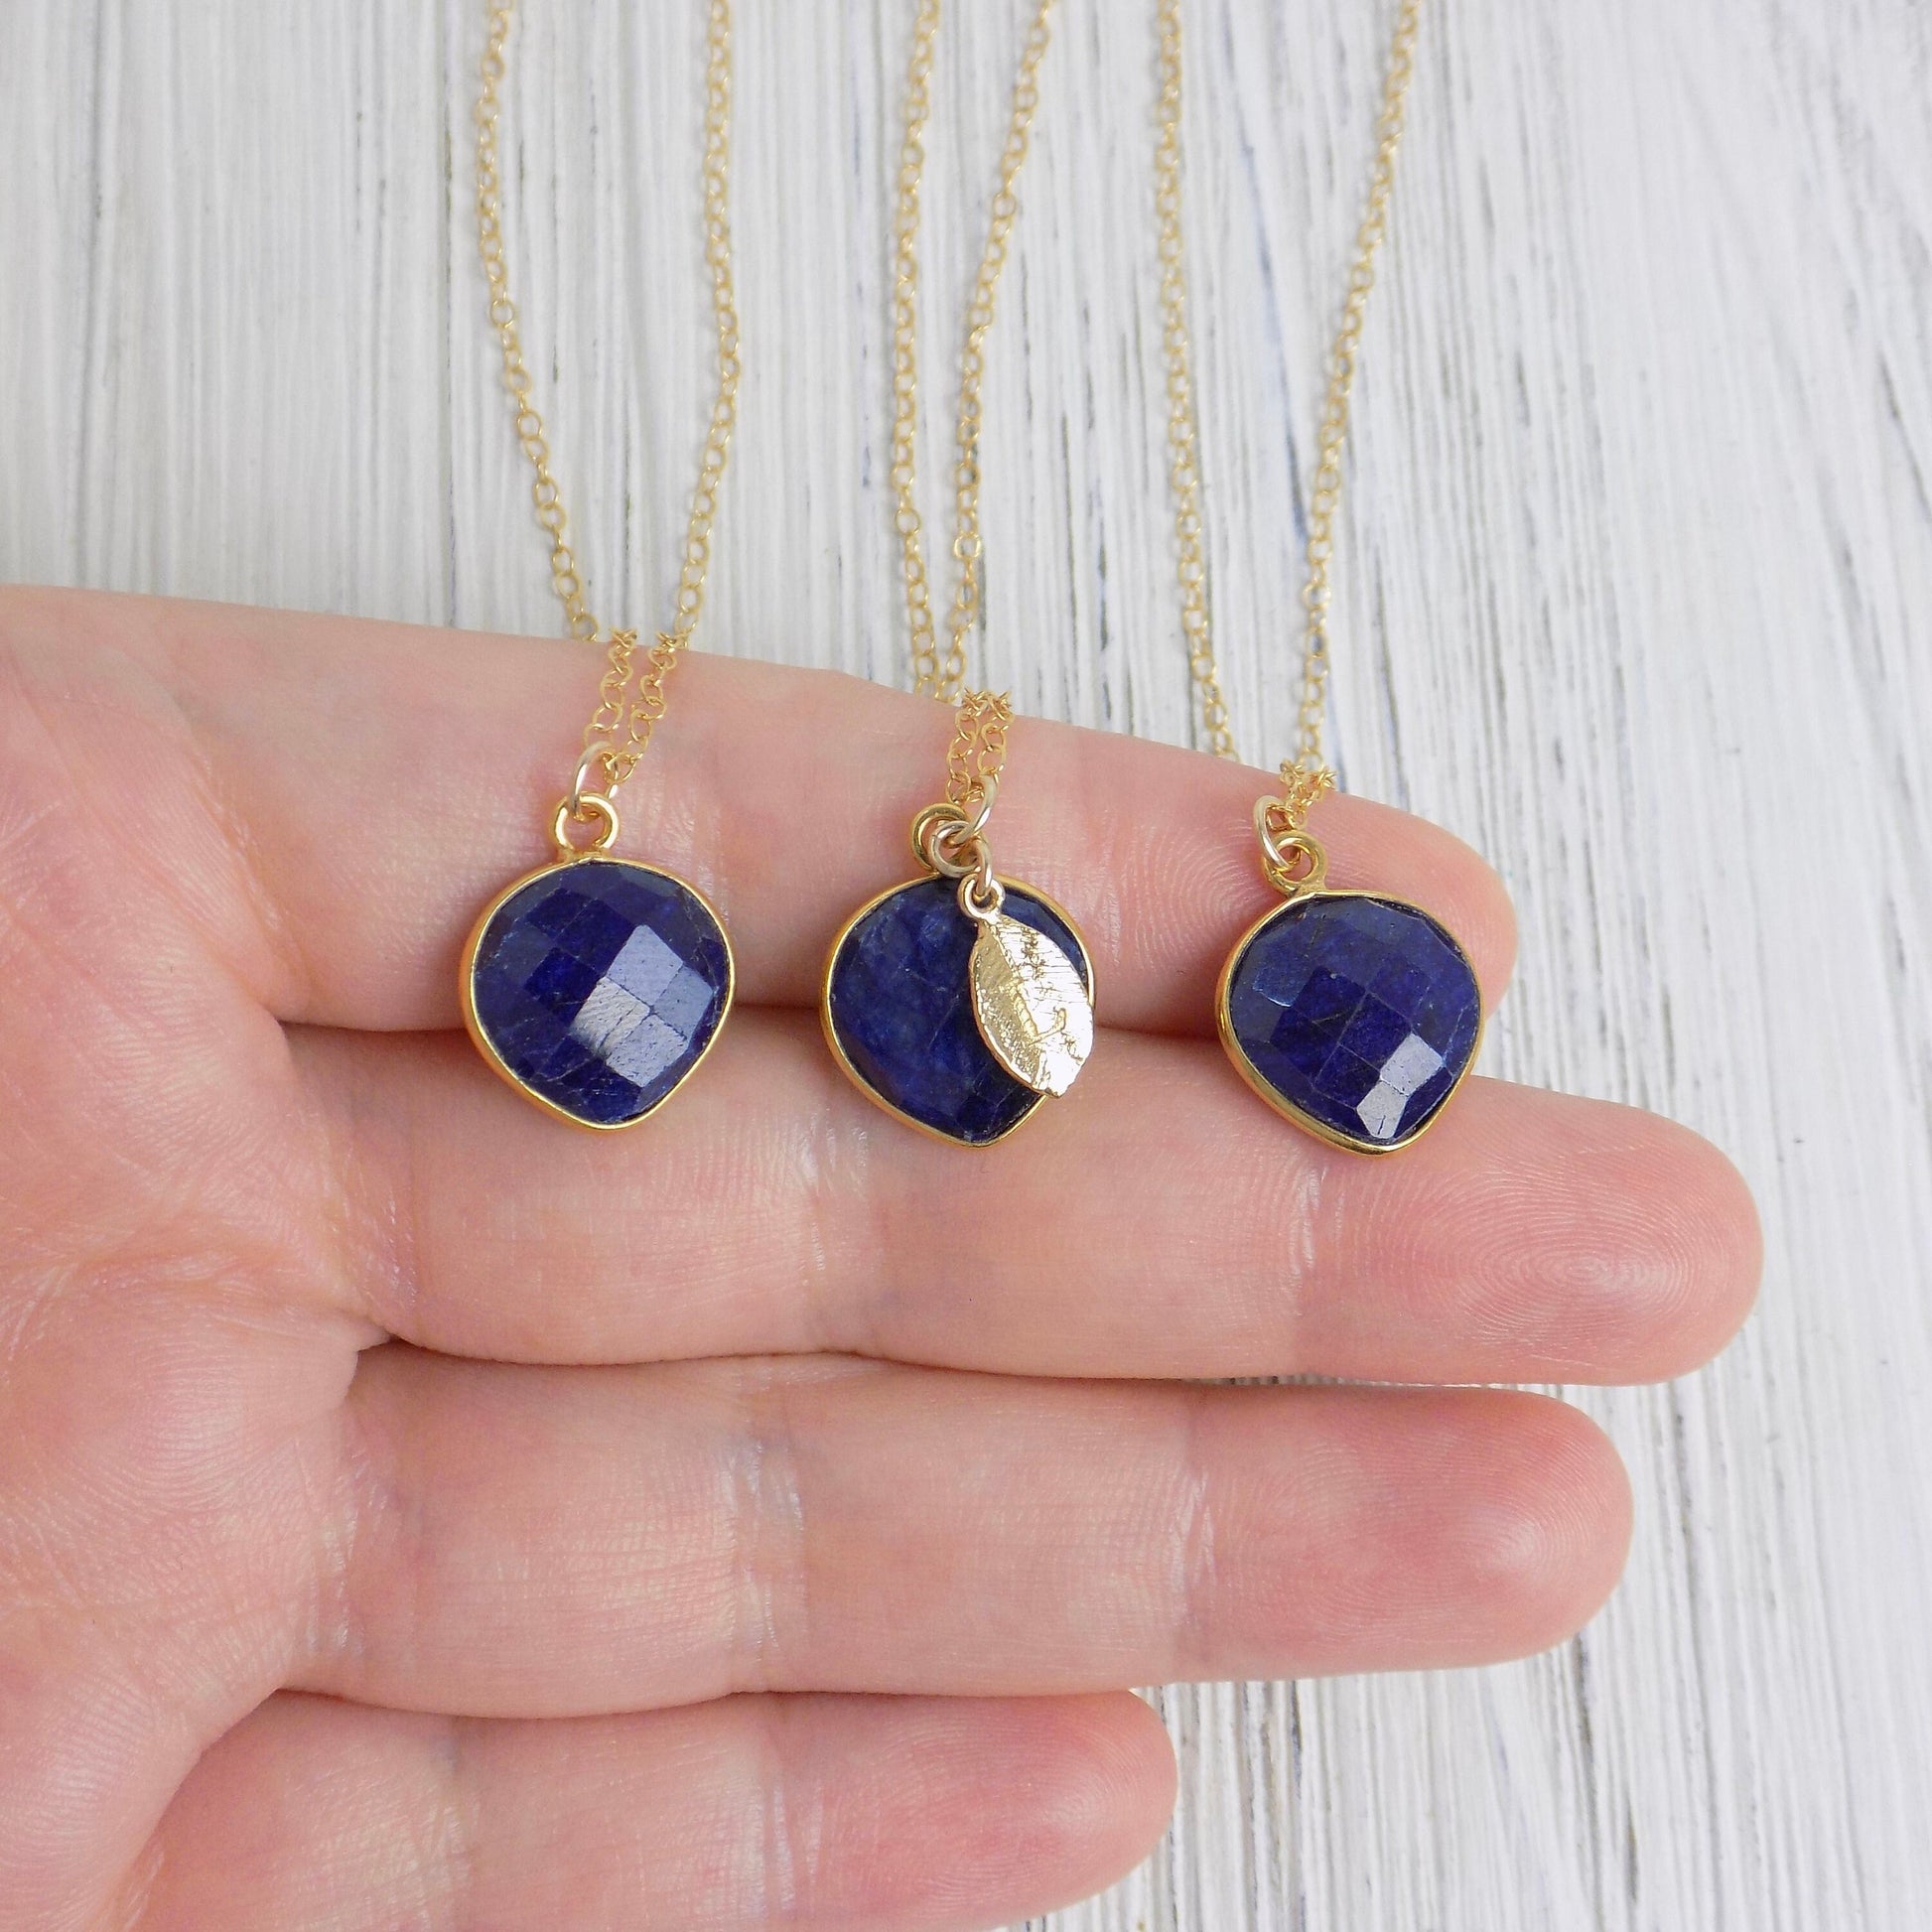 Natural Blue Sapphire Gemstone Necklace With Custom Initial on 14K Gold Filled Chain, M5-398